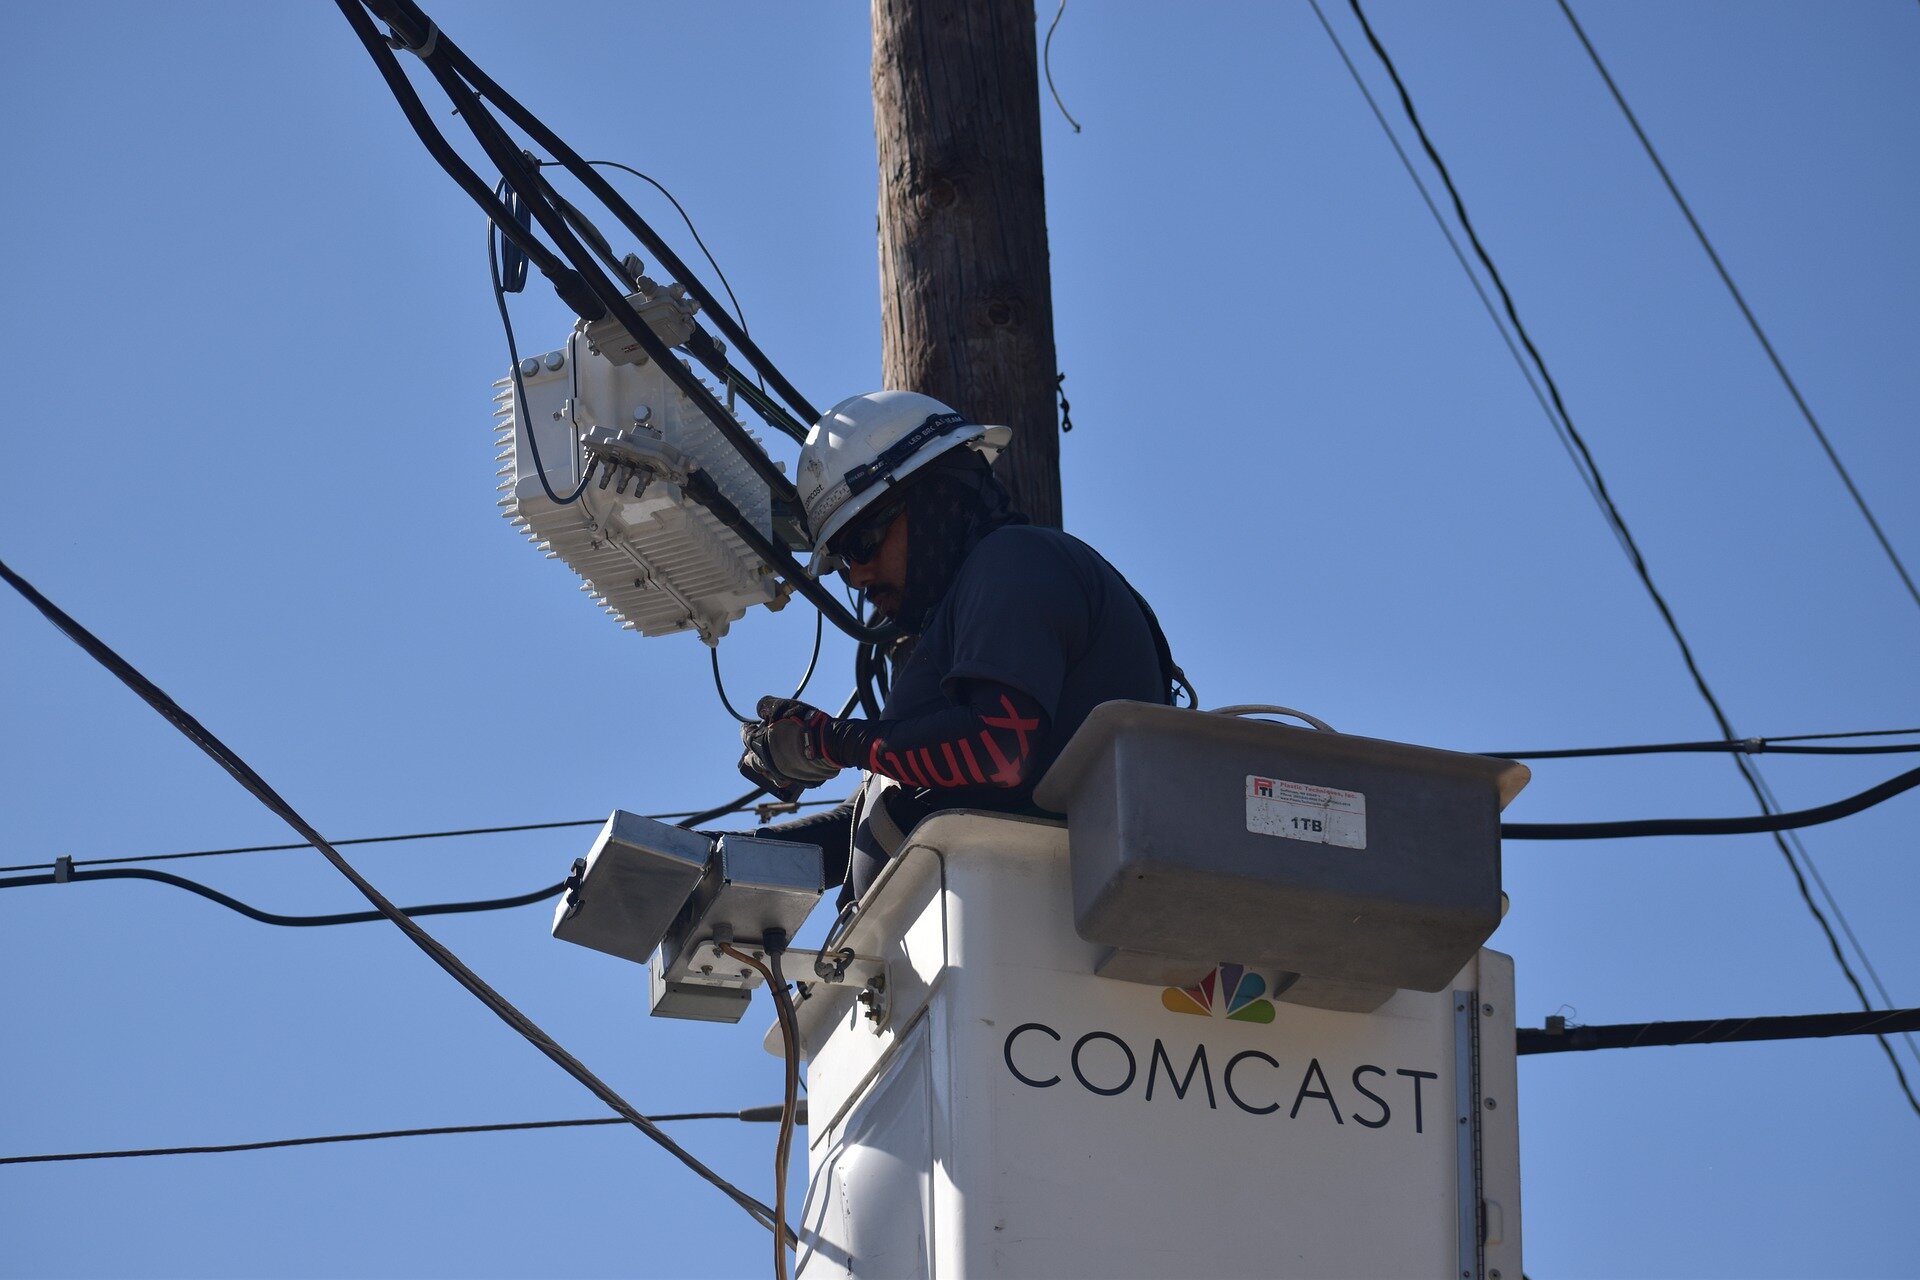 Comcast hypes 10G network. Is it twice as good as 5G? Actually, there’s no comparison possible